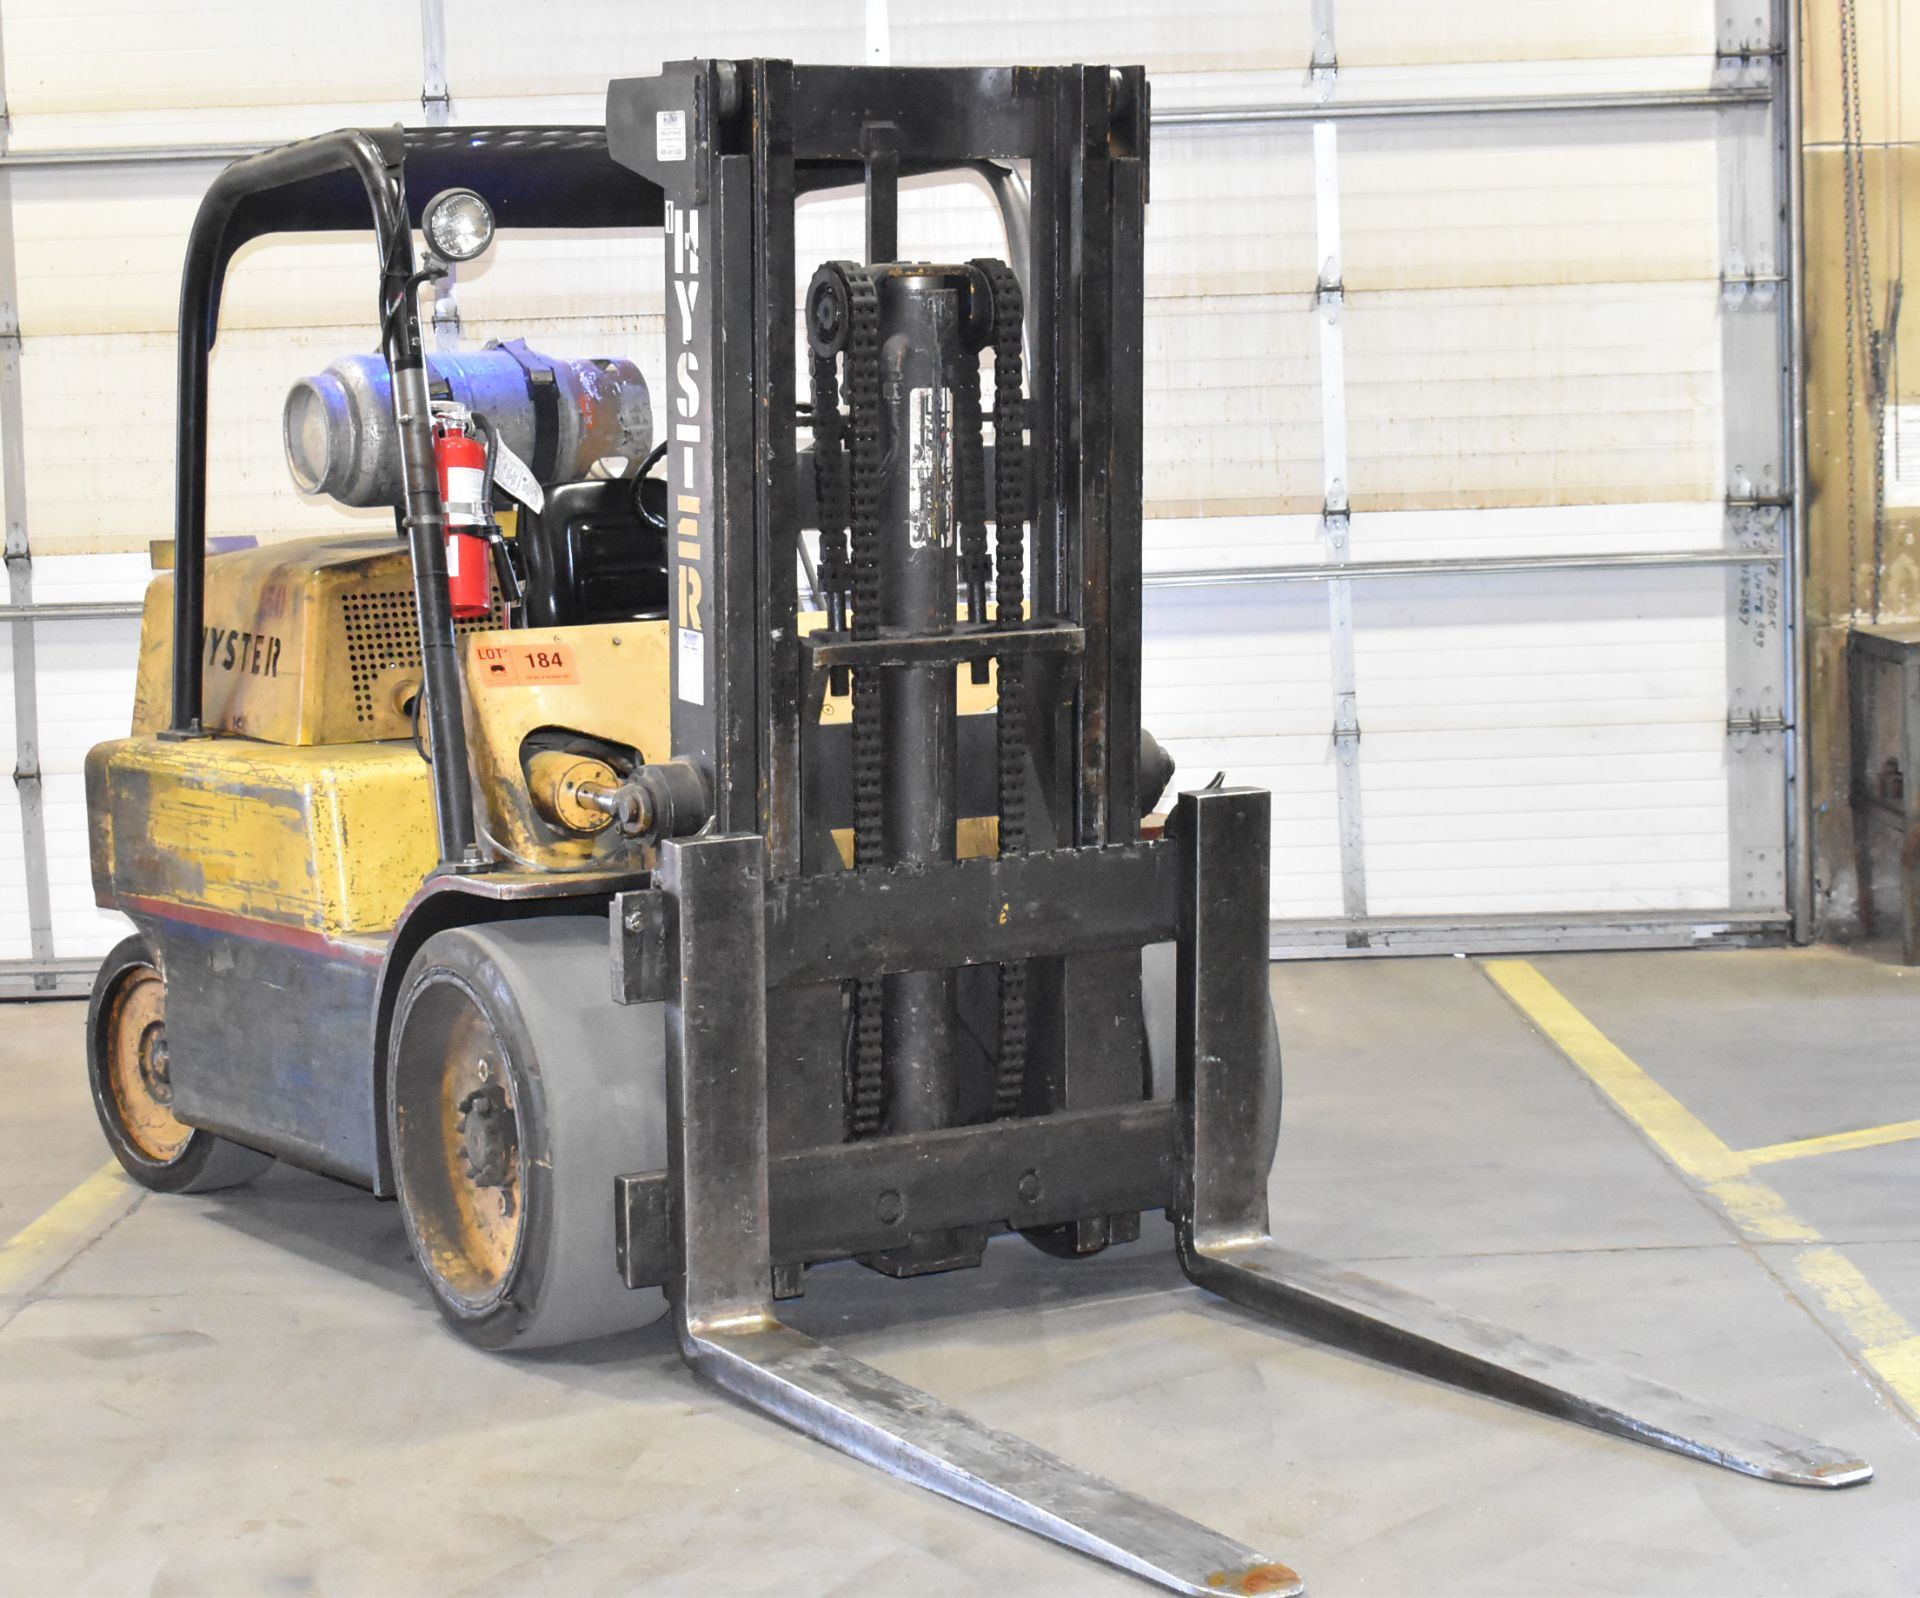 HYSTER S150A 15,000 LB. CAPACITY LPG FORKLIFT WITH 129" MAX. LIFT HEIGHT, 2-STAGE MAST, SOLID TIRES, - Image 2 of 18